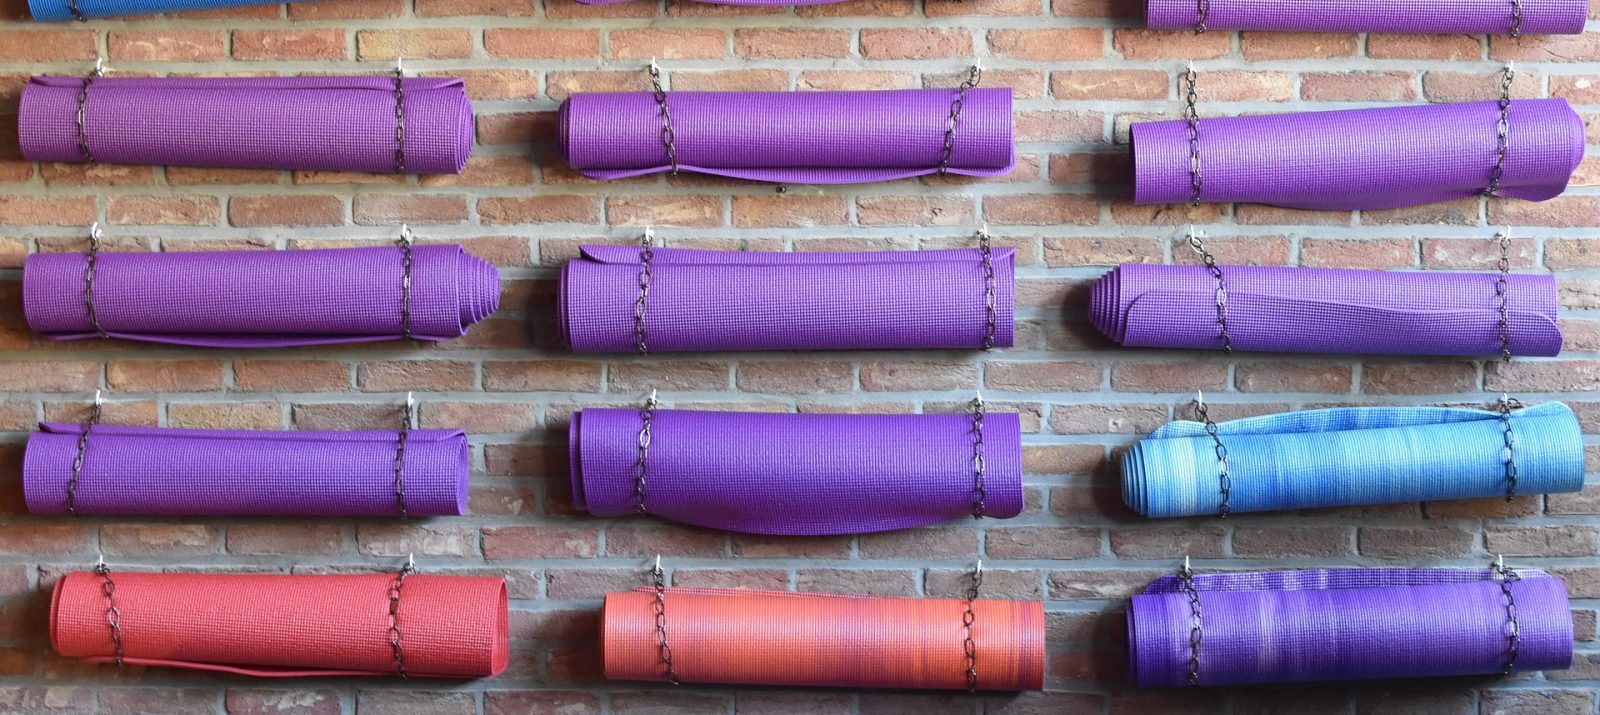 How To Store Yoga Mats